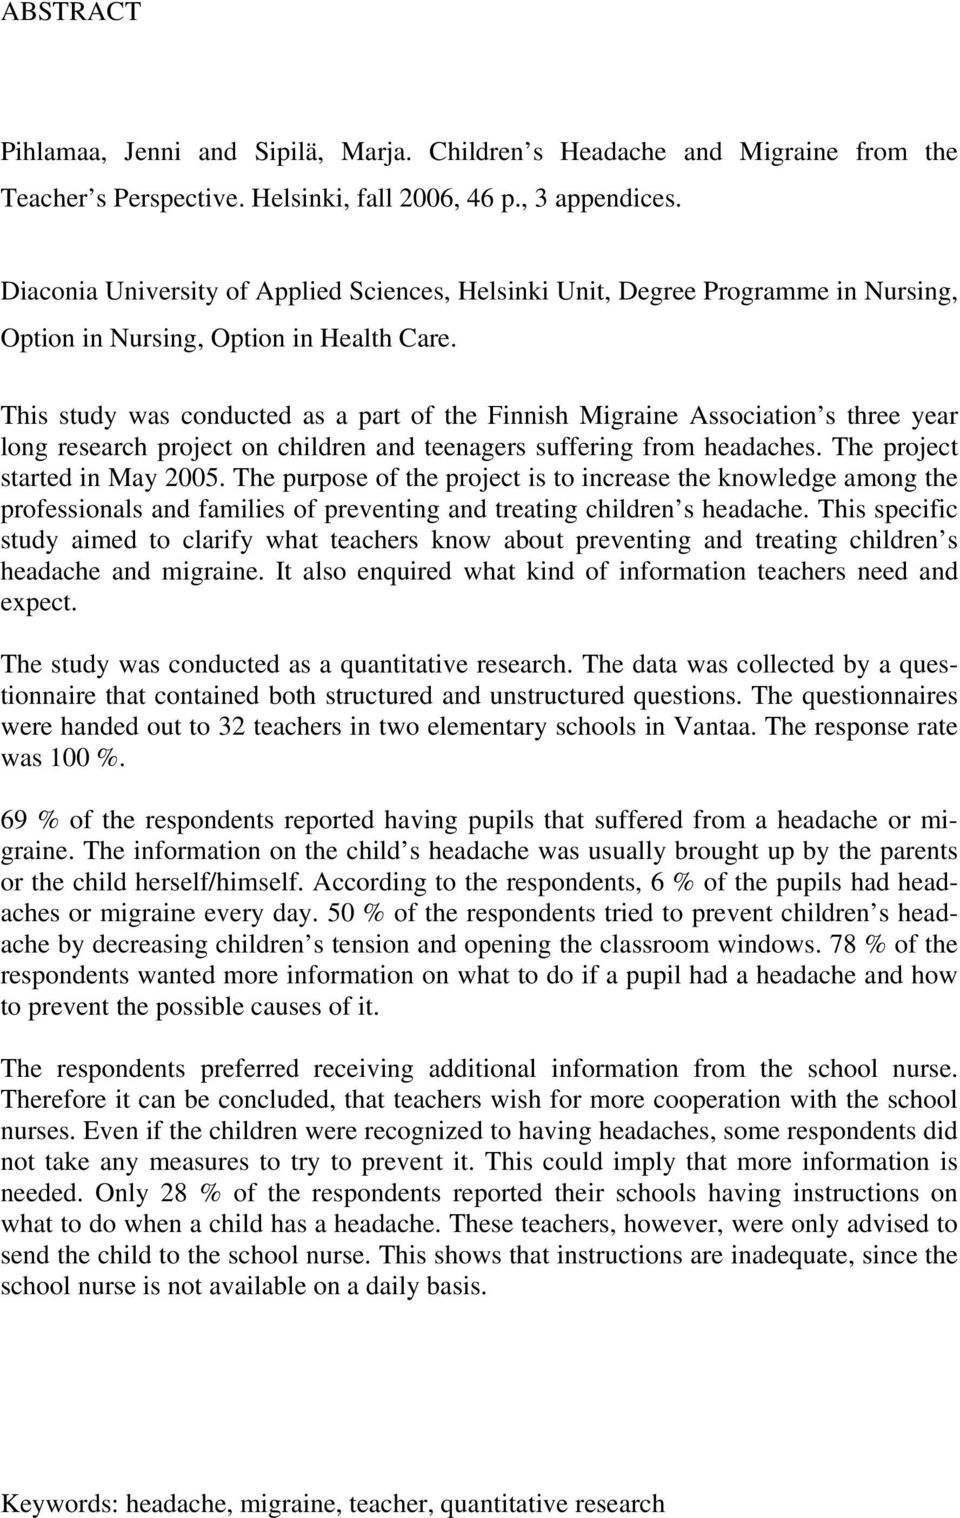 This study was conducted as a part of the Finnish Migraine Association s three year long research project on children and teenagers suffering from headaches. The project started in May 2005.